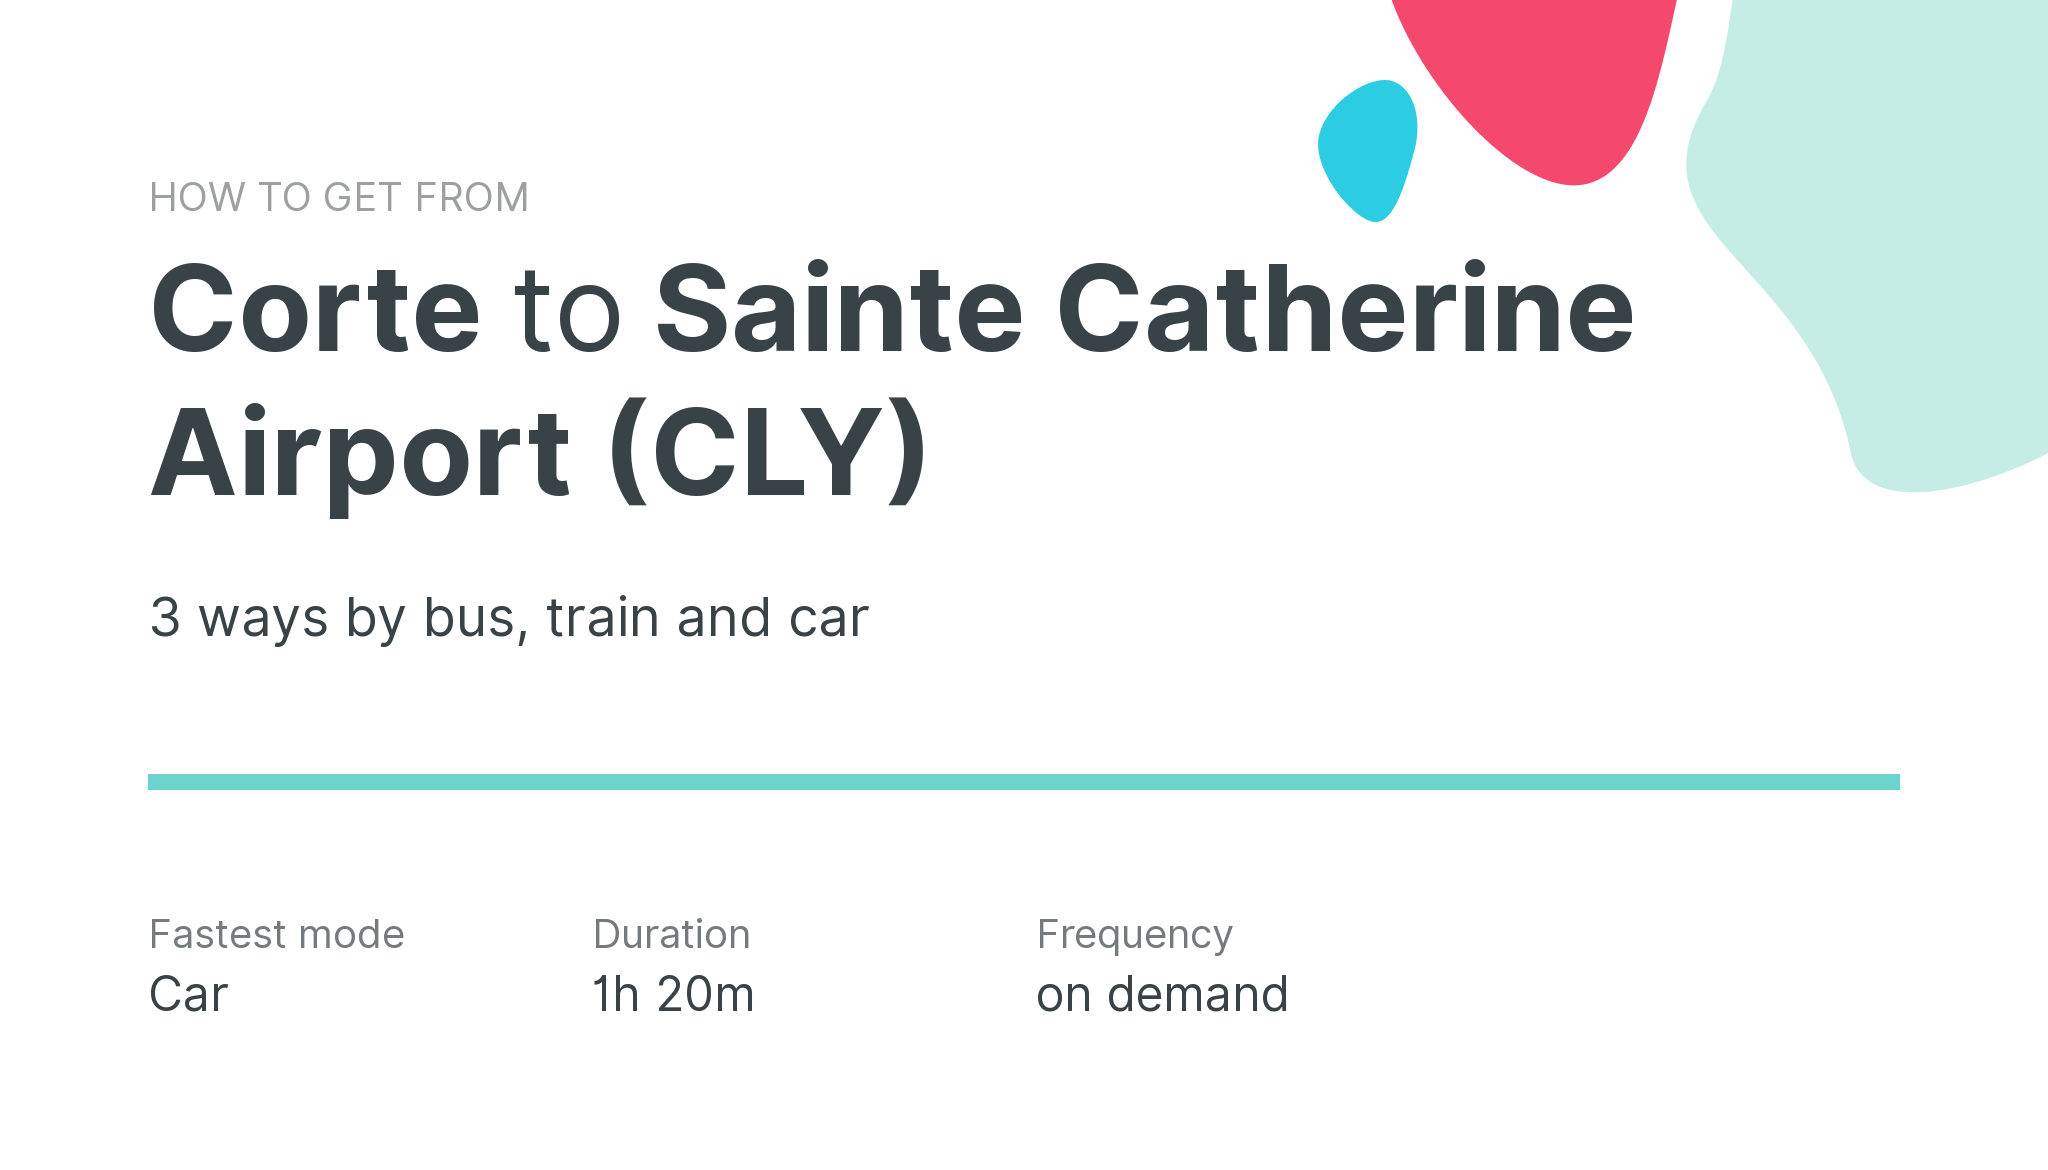 How do I get from Corte to Sainte Catherine Airport (CLY)